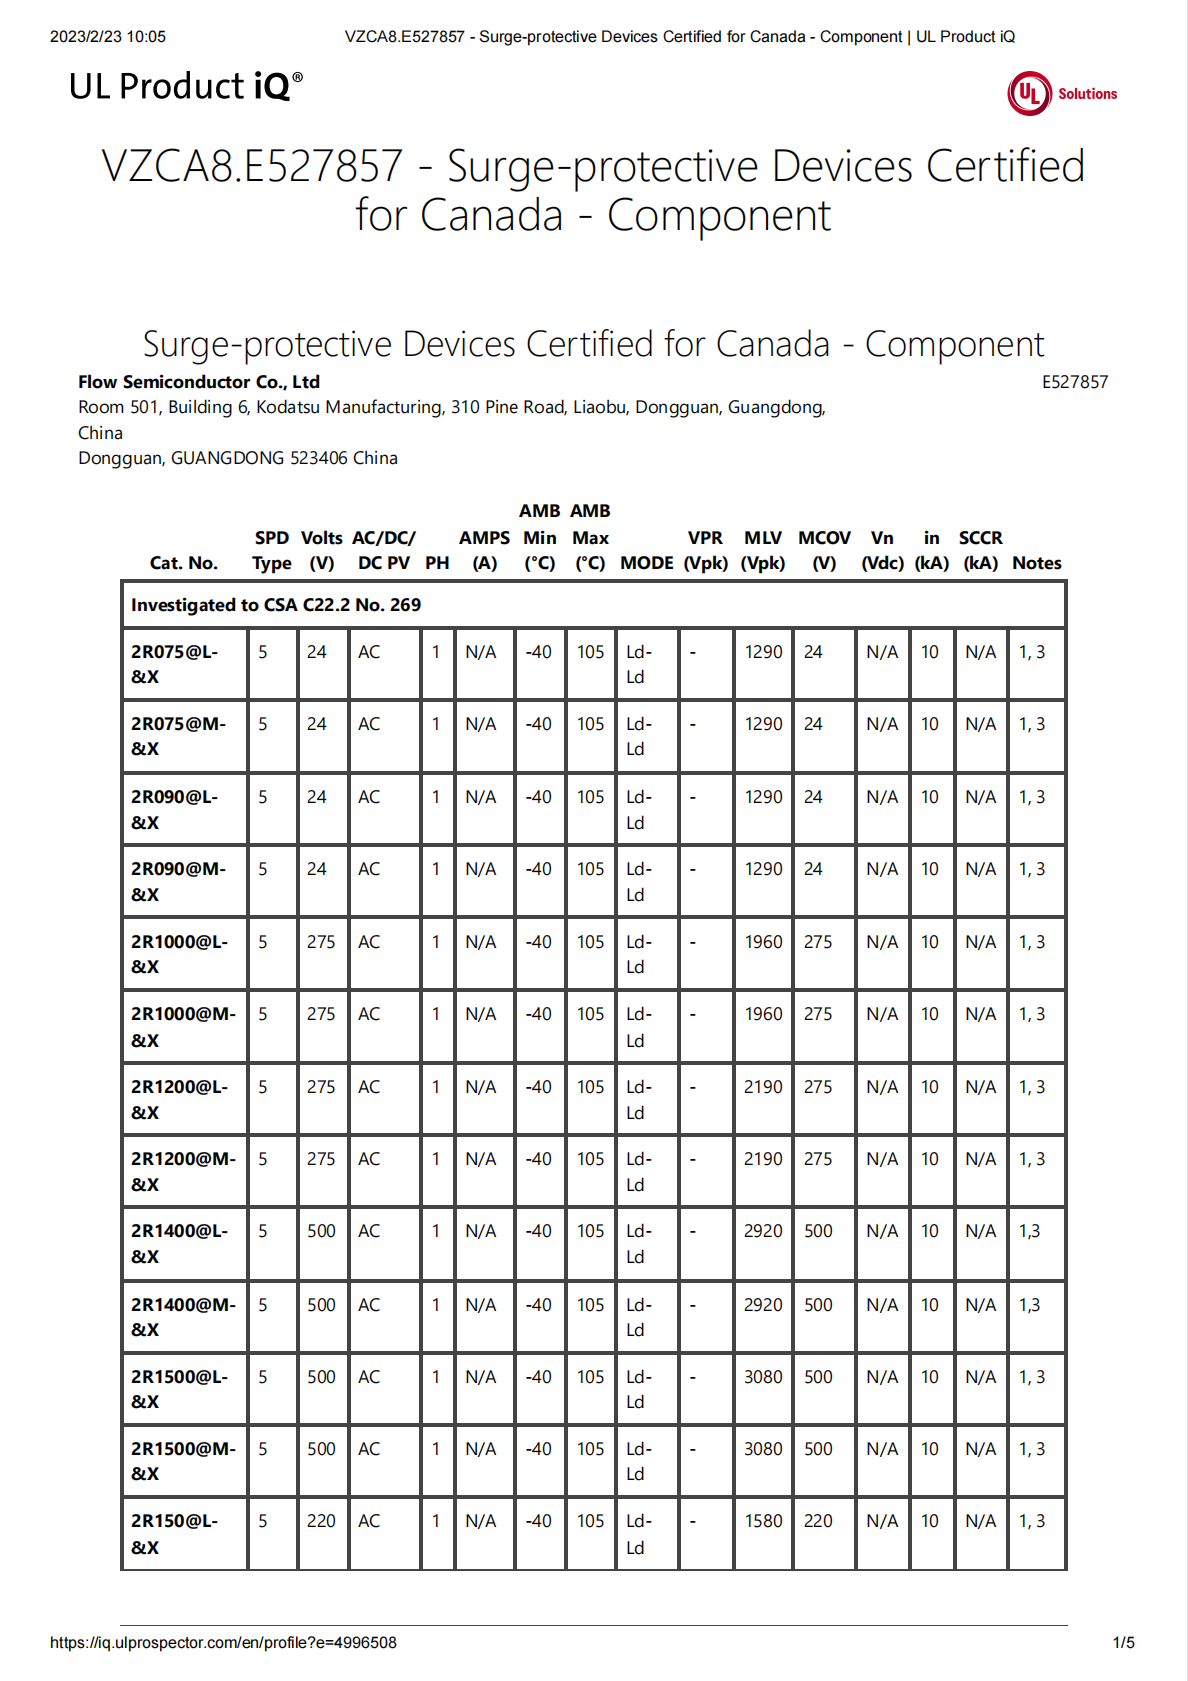 GDT安規認證（VZCA8.E527857 - Surge-protective Devices Certified for Canada - Component）